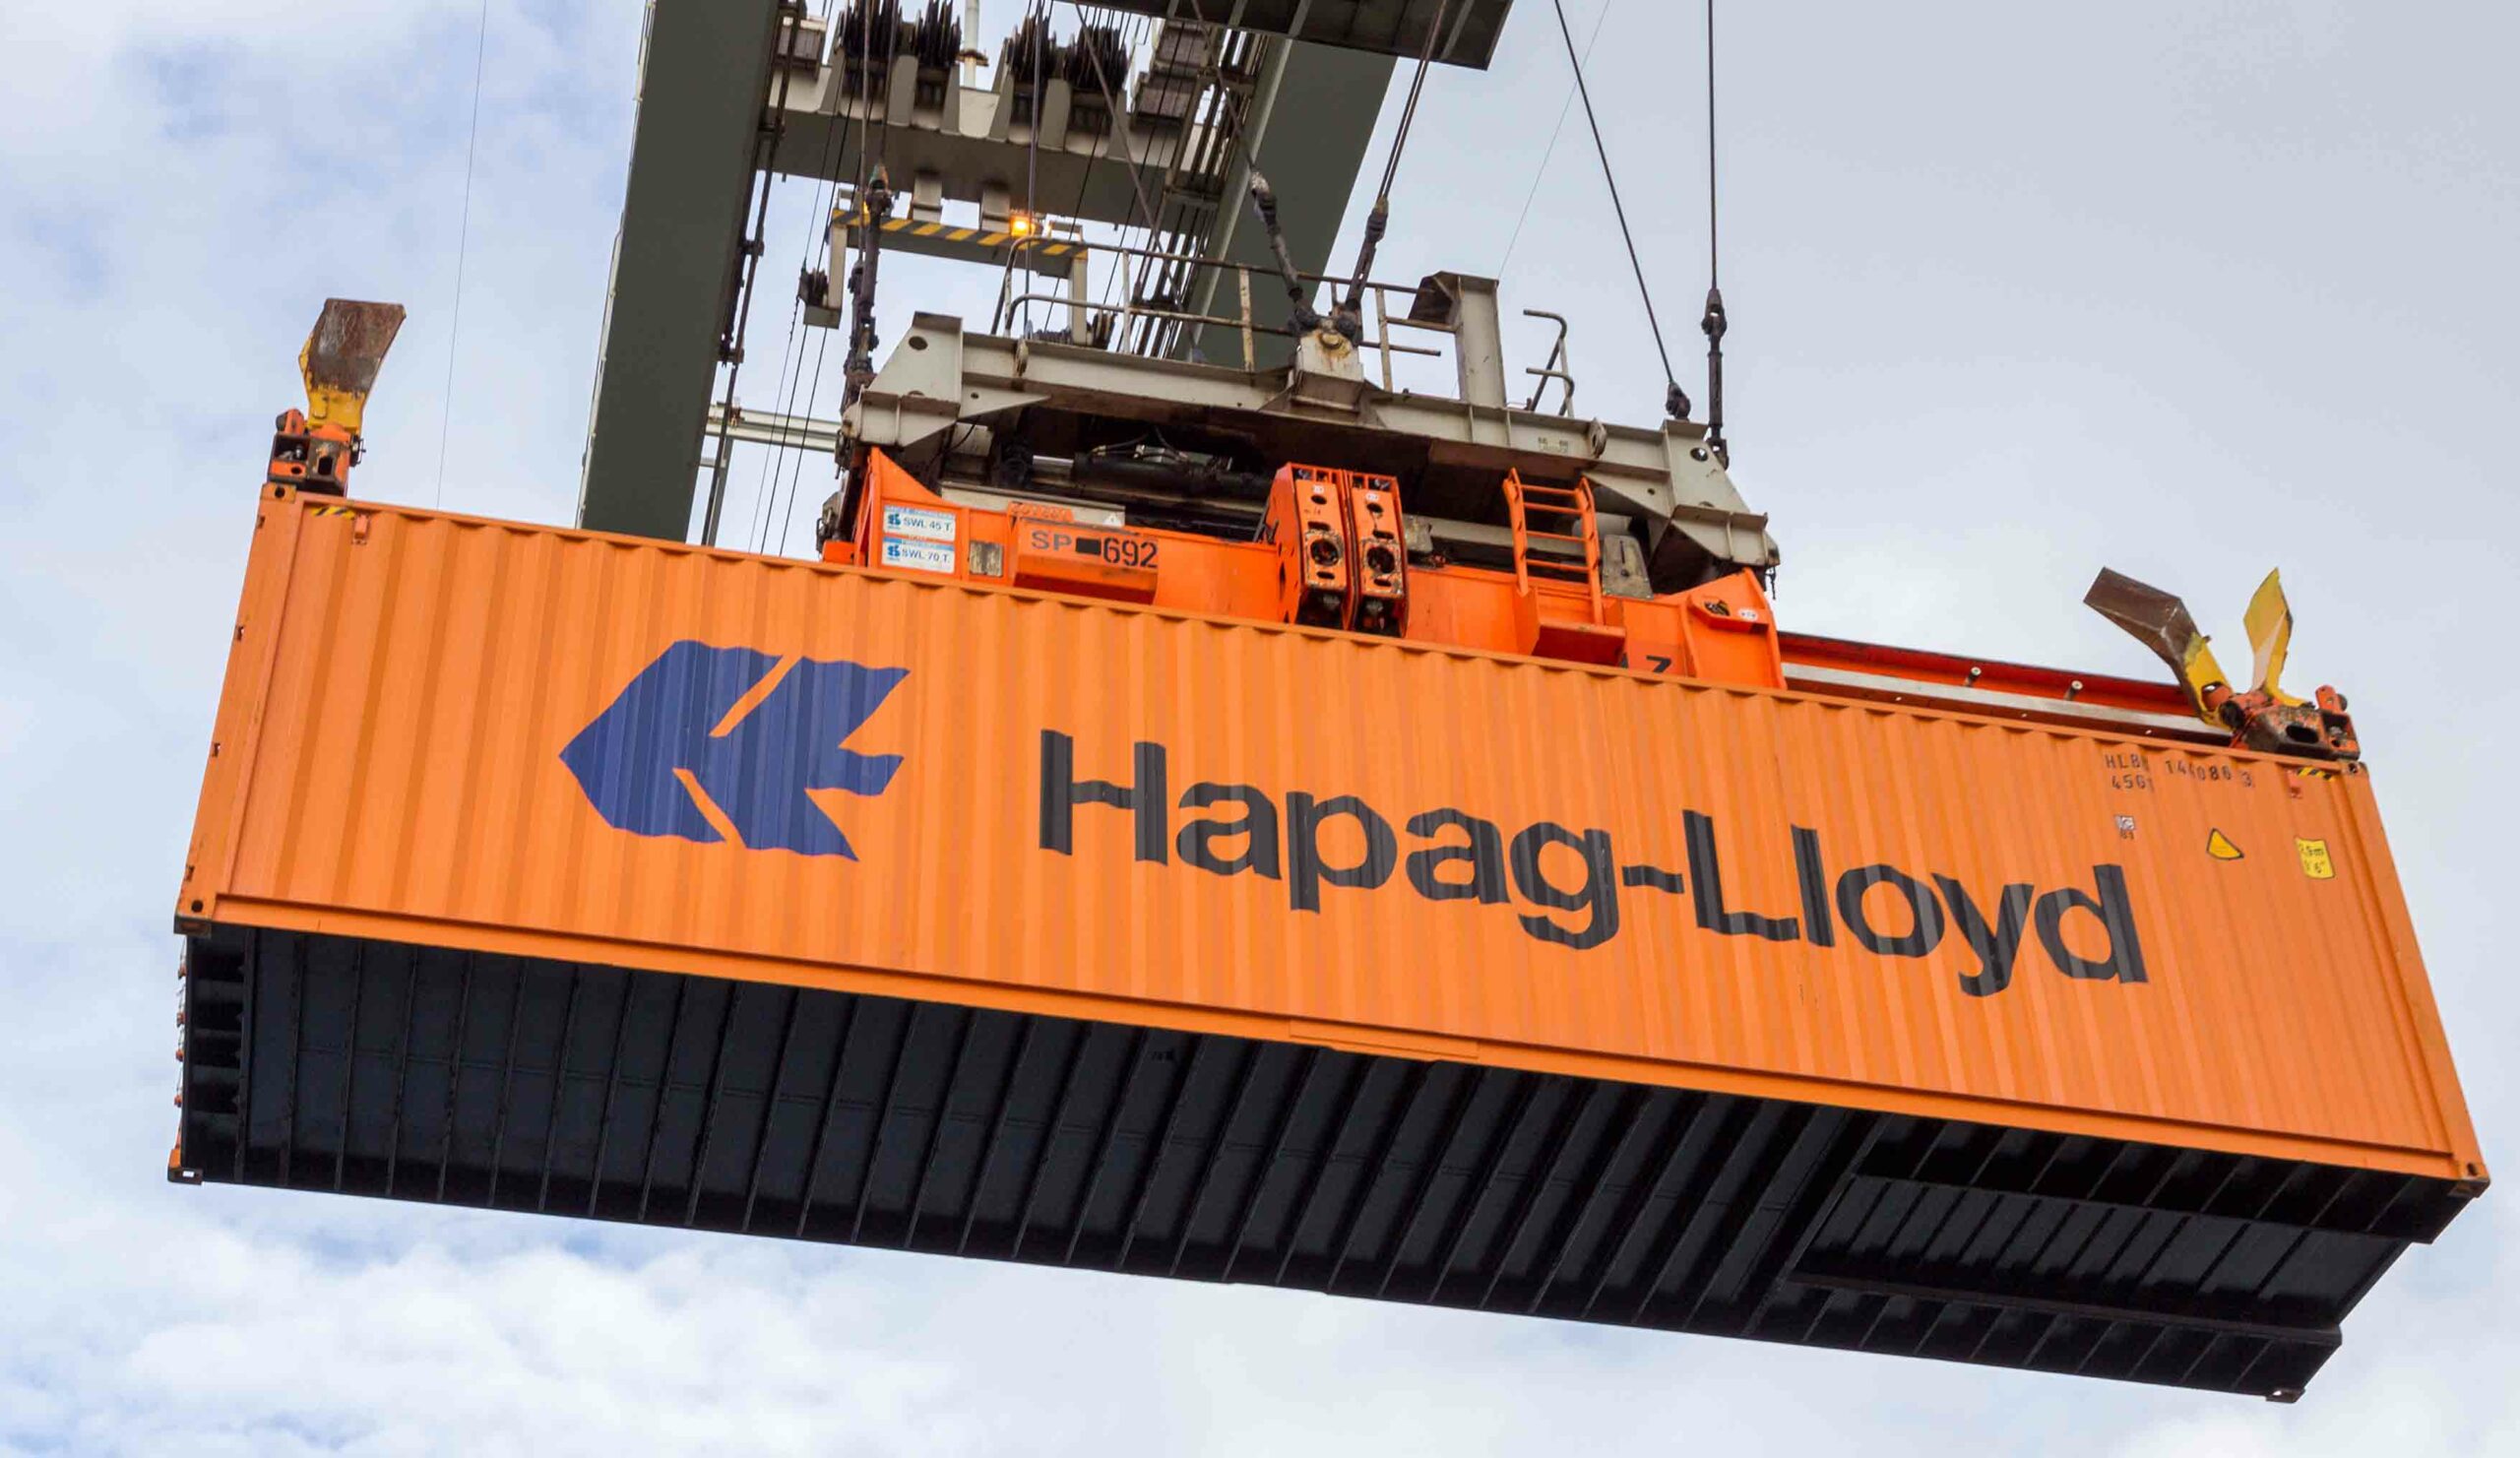 Hapag-Lloyd CEO predicts market situation remains stable up to Q3 - Atlas Network